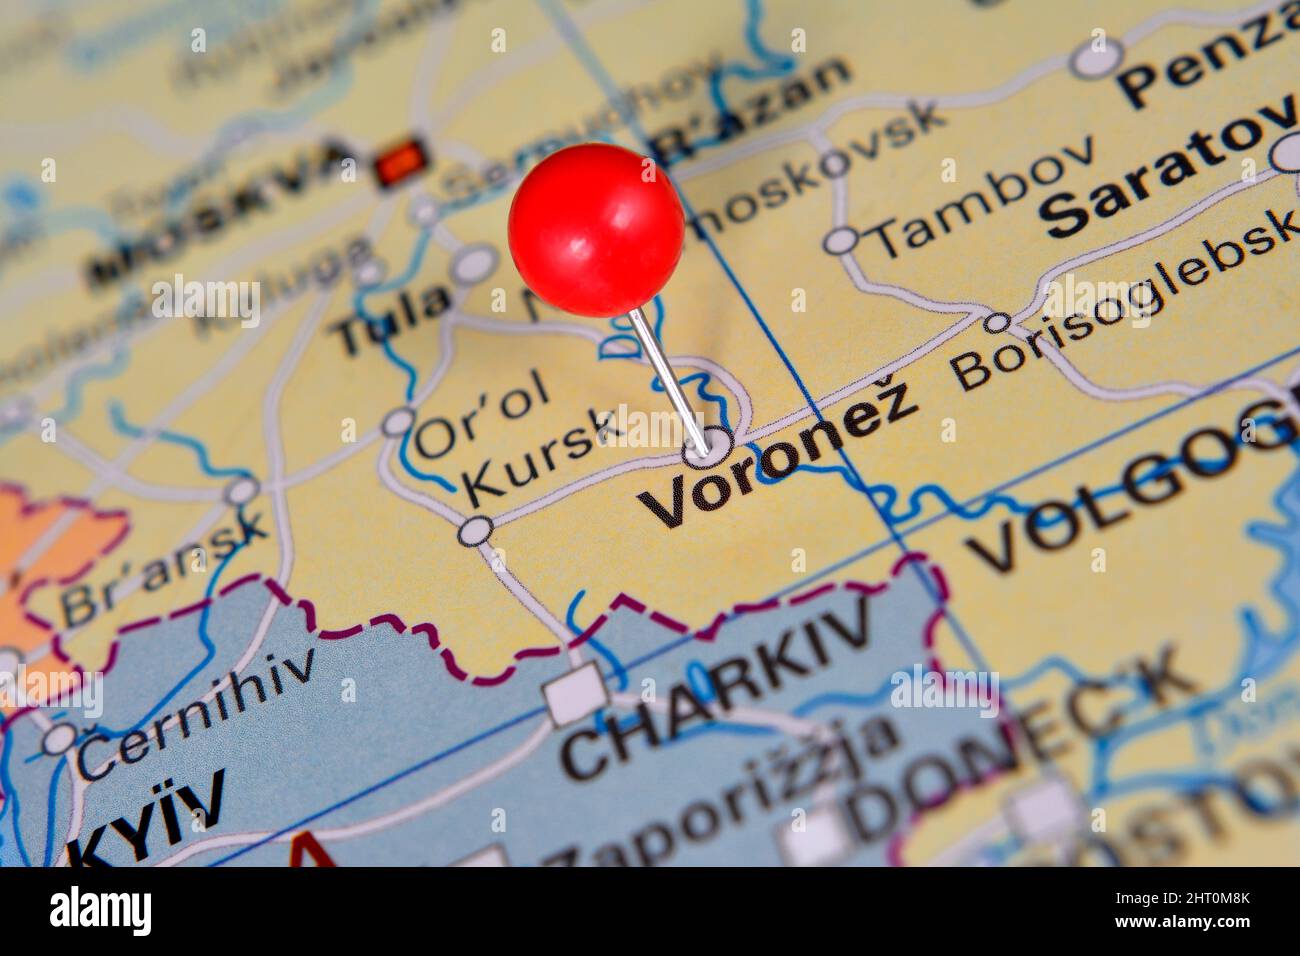 Pin marked city Voronez on map, Russia Stock Photo